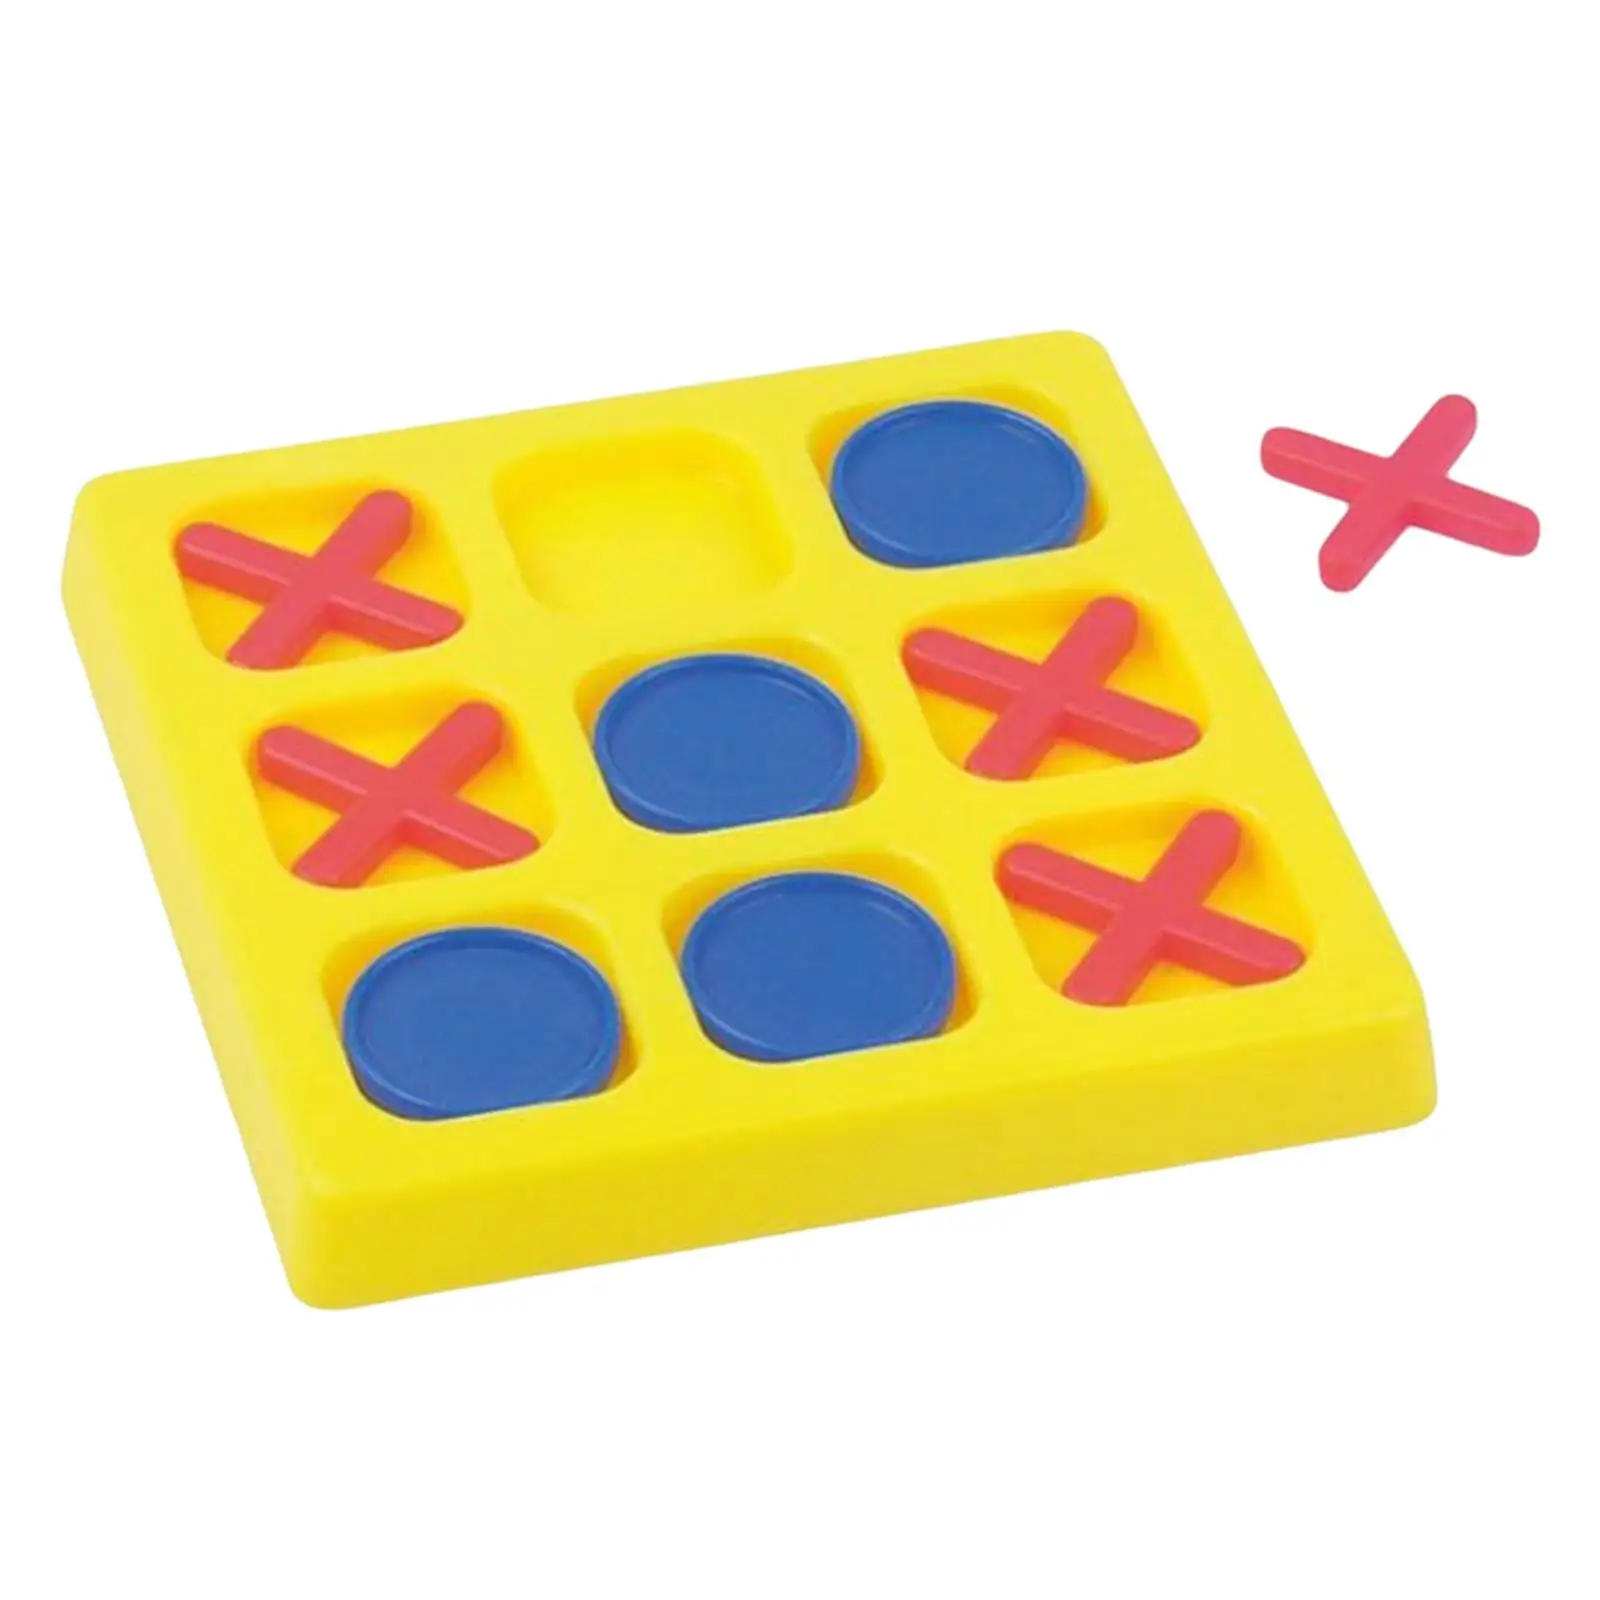 Tic TAC Toe Kids Gift Marble Solitaire  Game for Backyard Entertainment